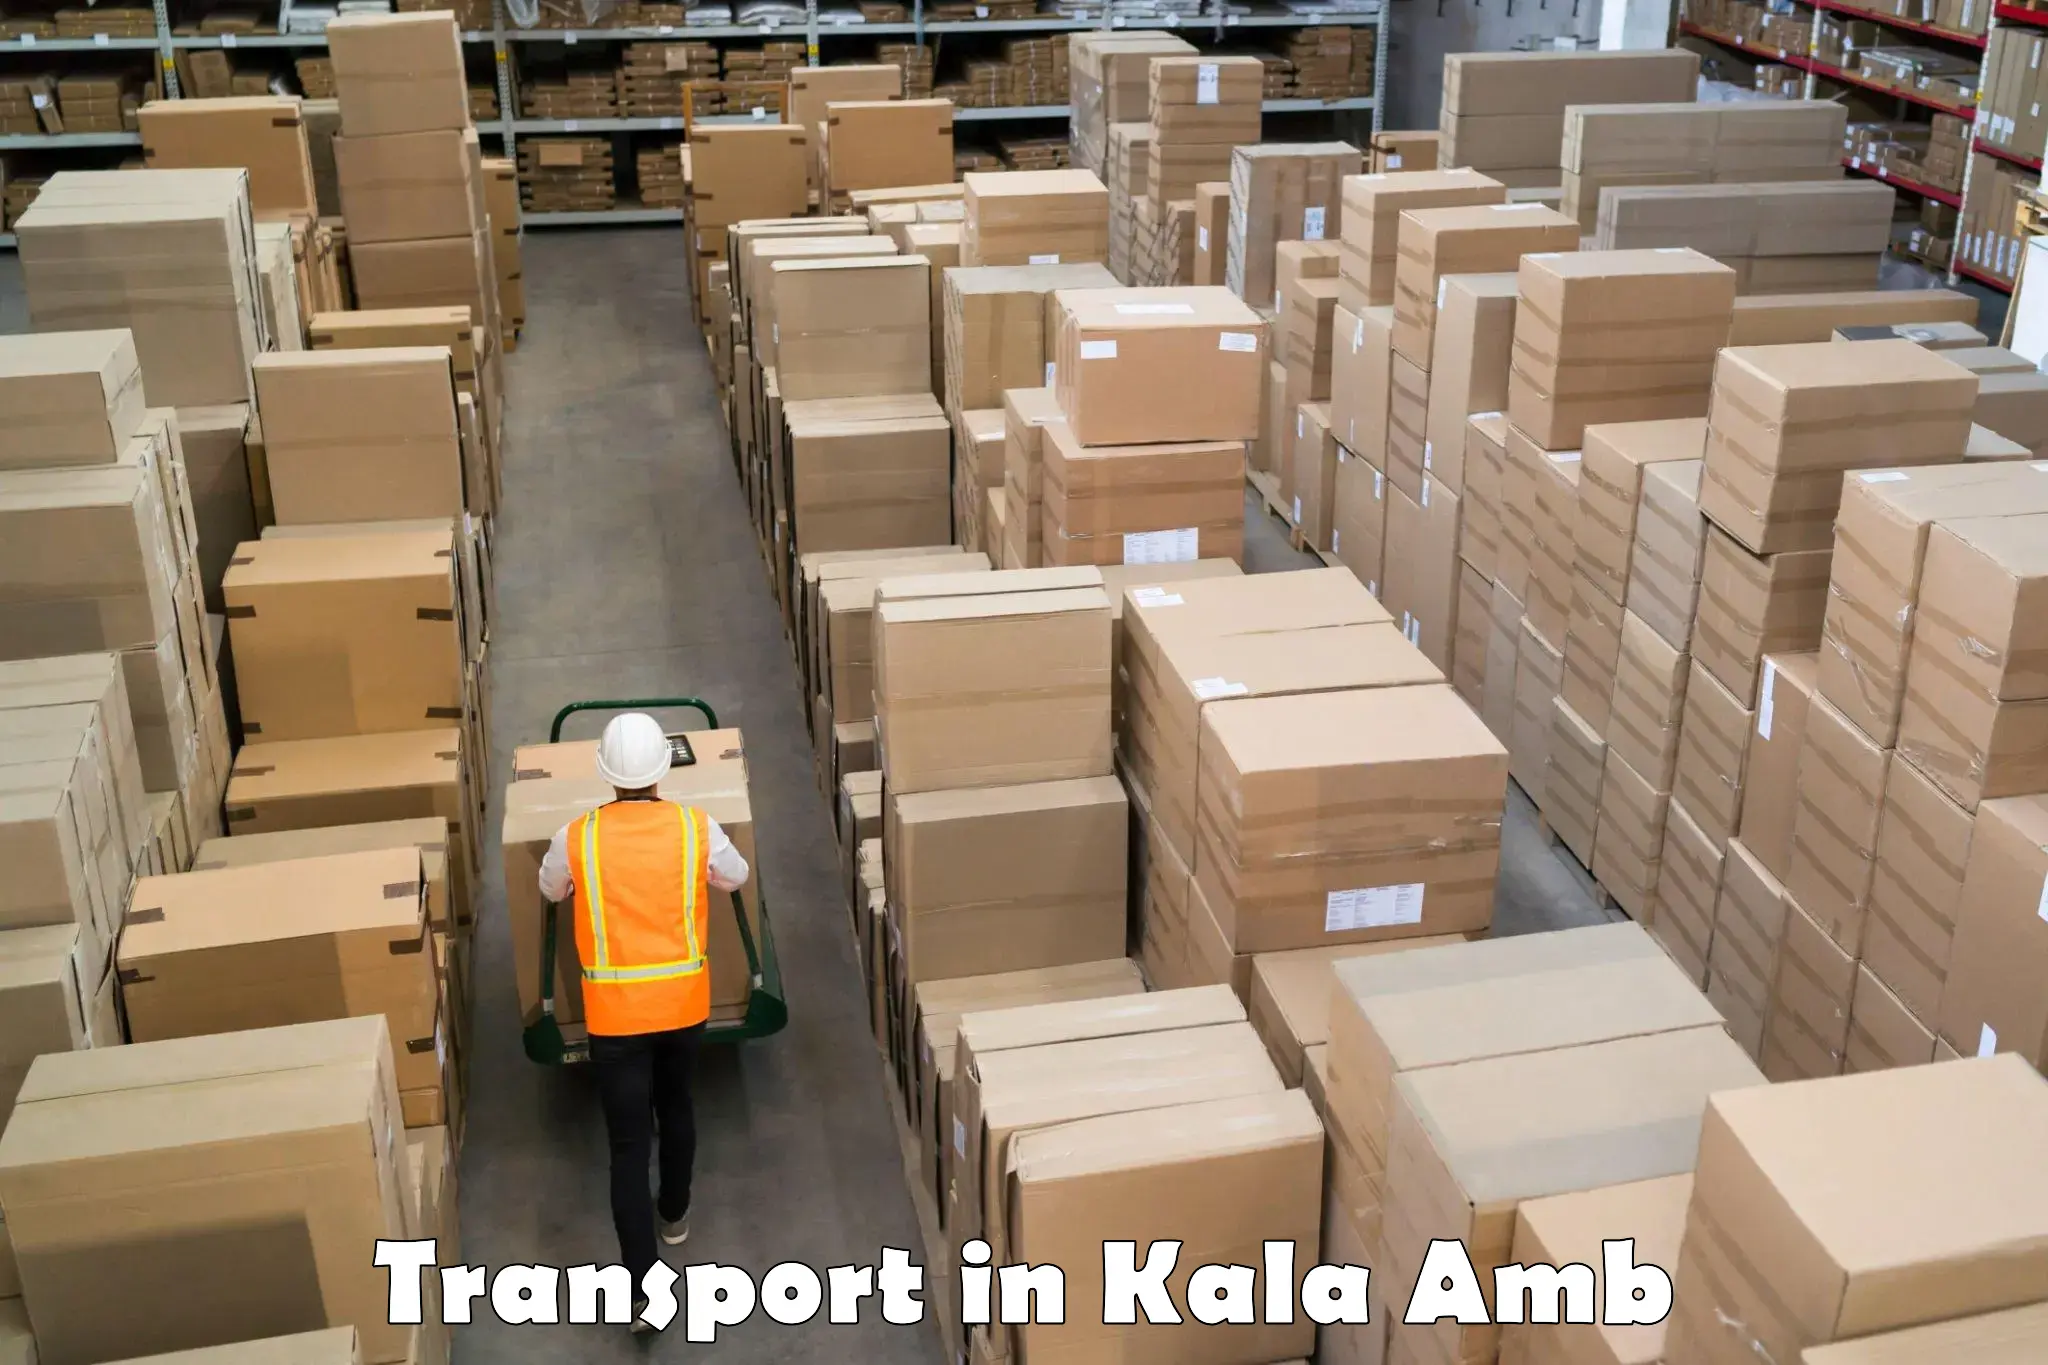 Transport services in Kala Amb